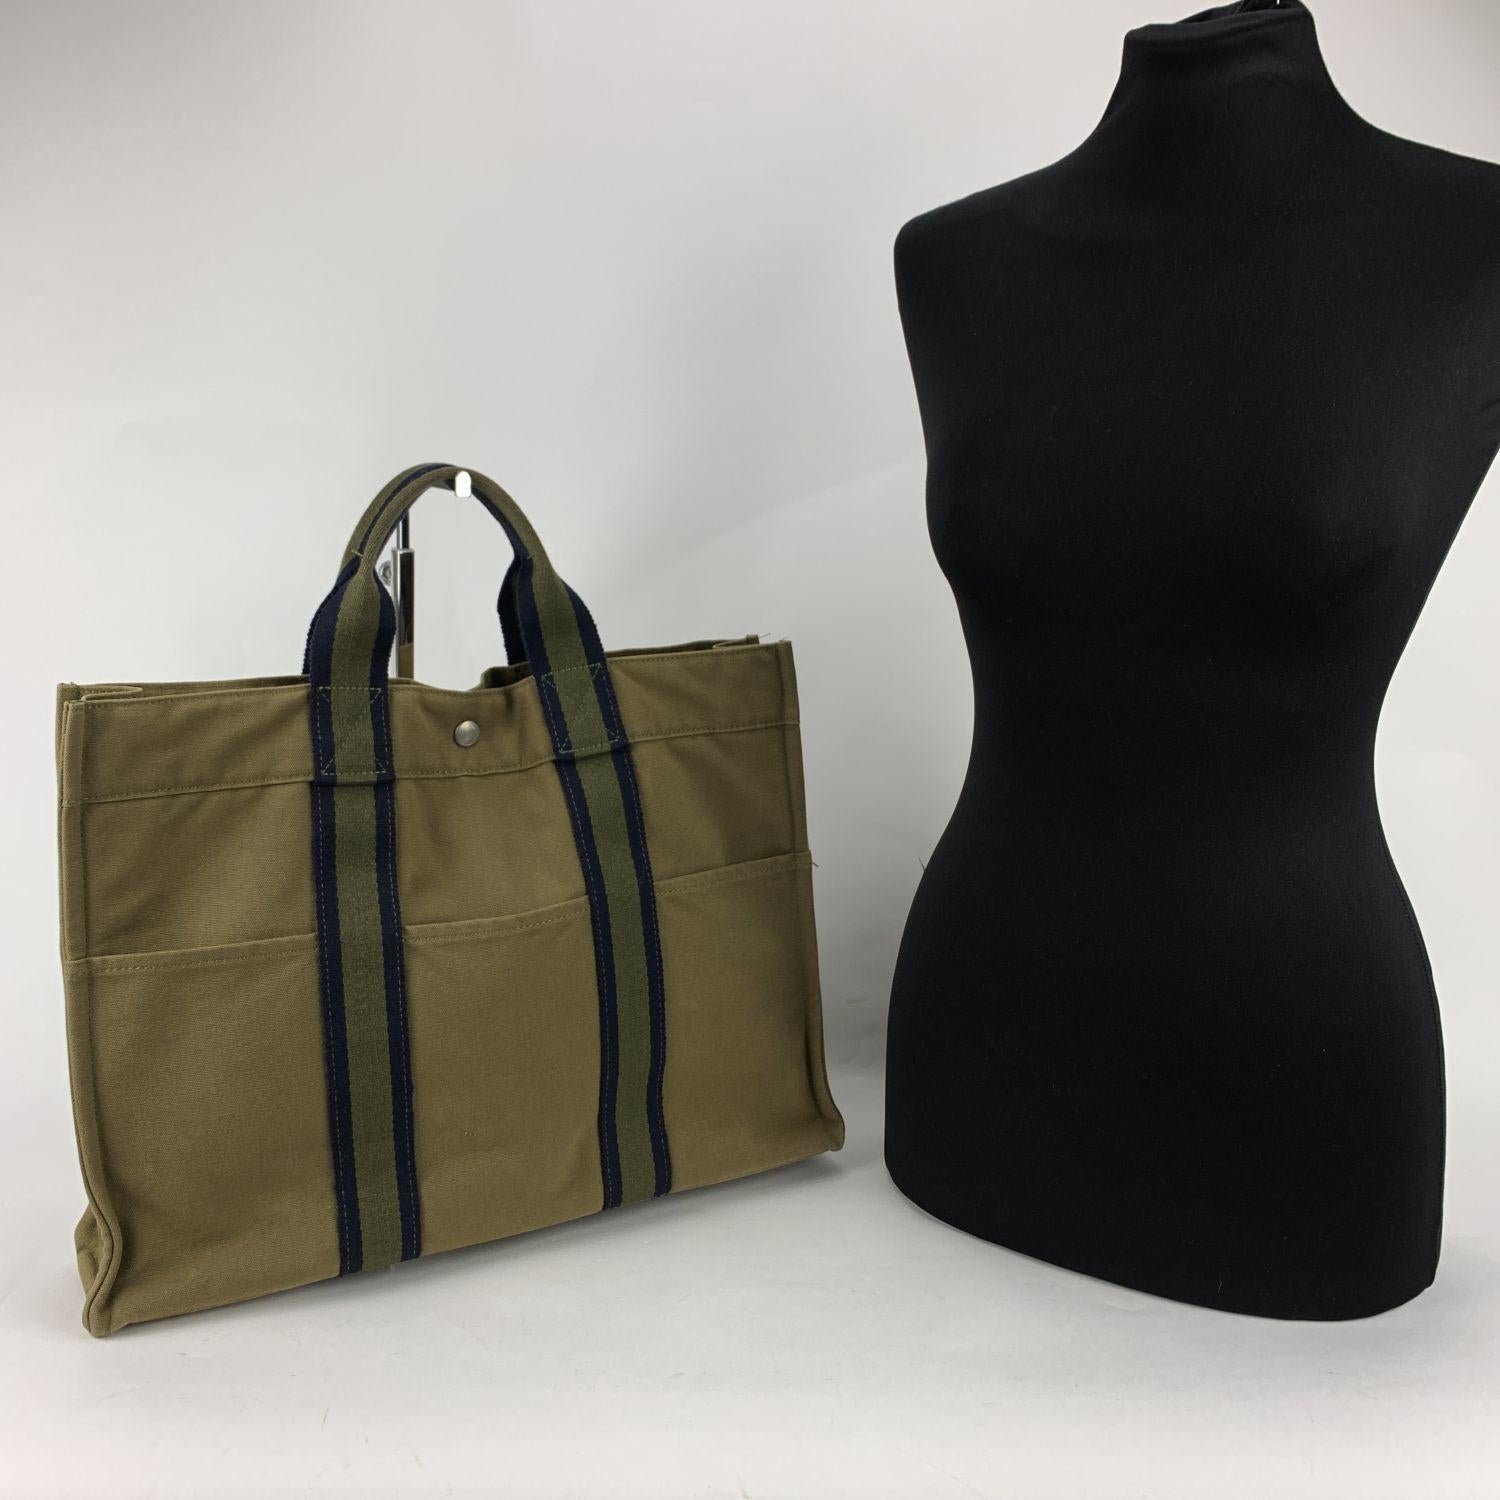 Hermes Paris Vintage green cotton canvas tote, Fourre Tout MM. Made in France. Blue stripes. 100% Cotton. 3 front pockets on the front and 3 pockets on the back. It has snaps (buttons) on both ends for expansion. Durable canvas handles, perfect for